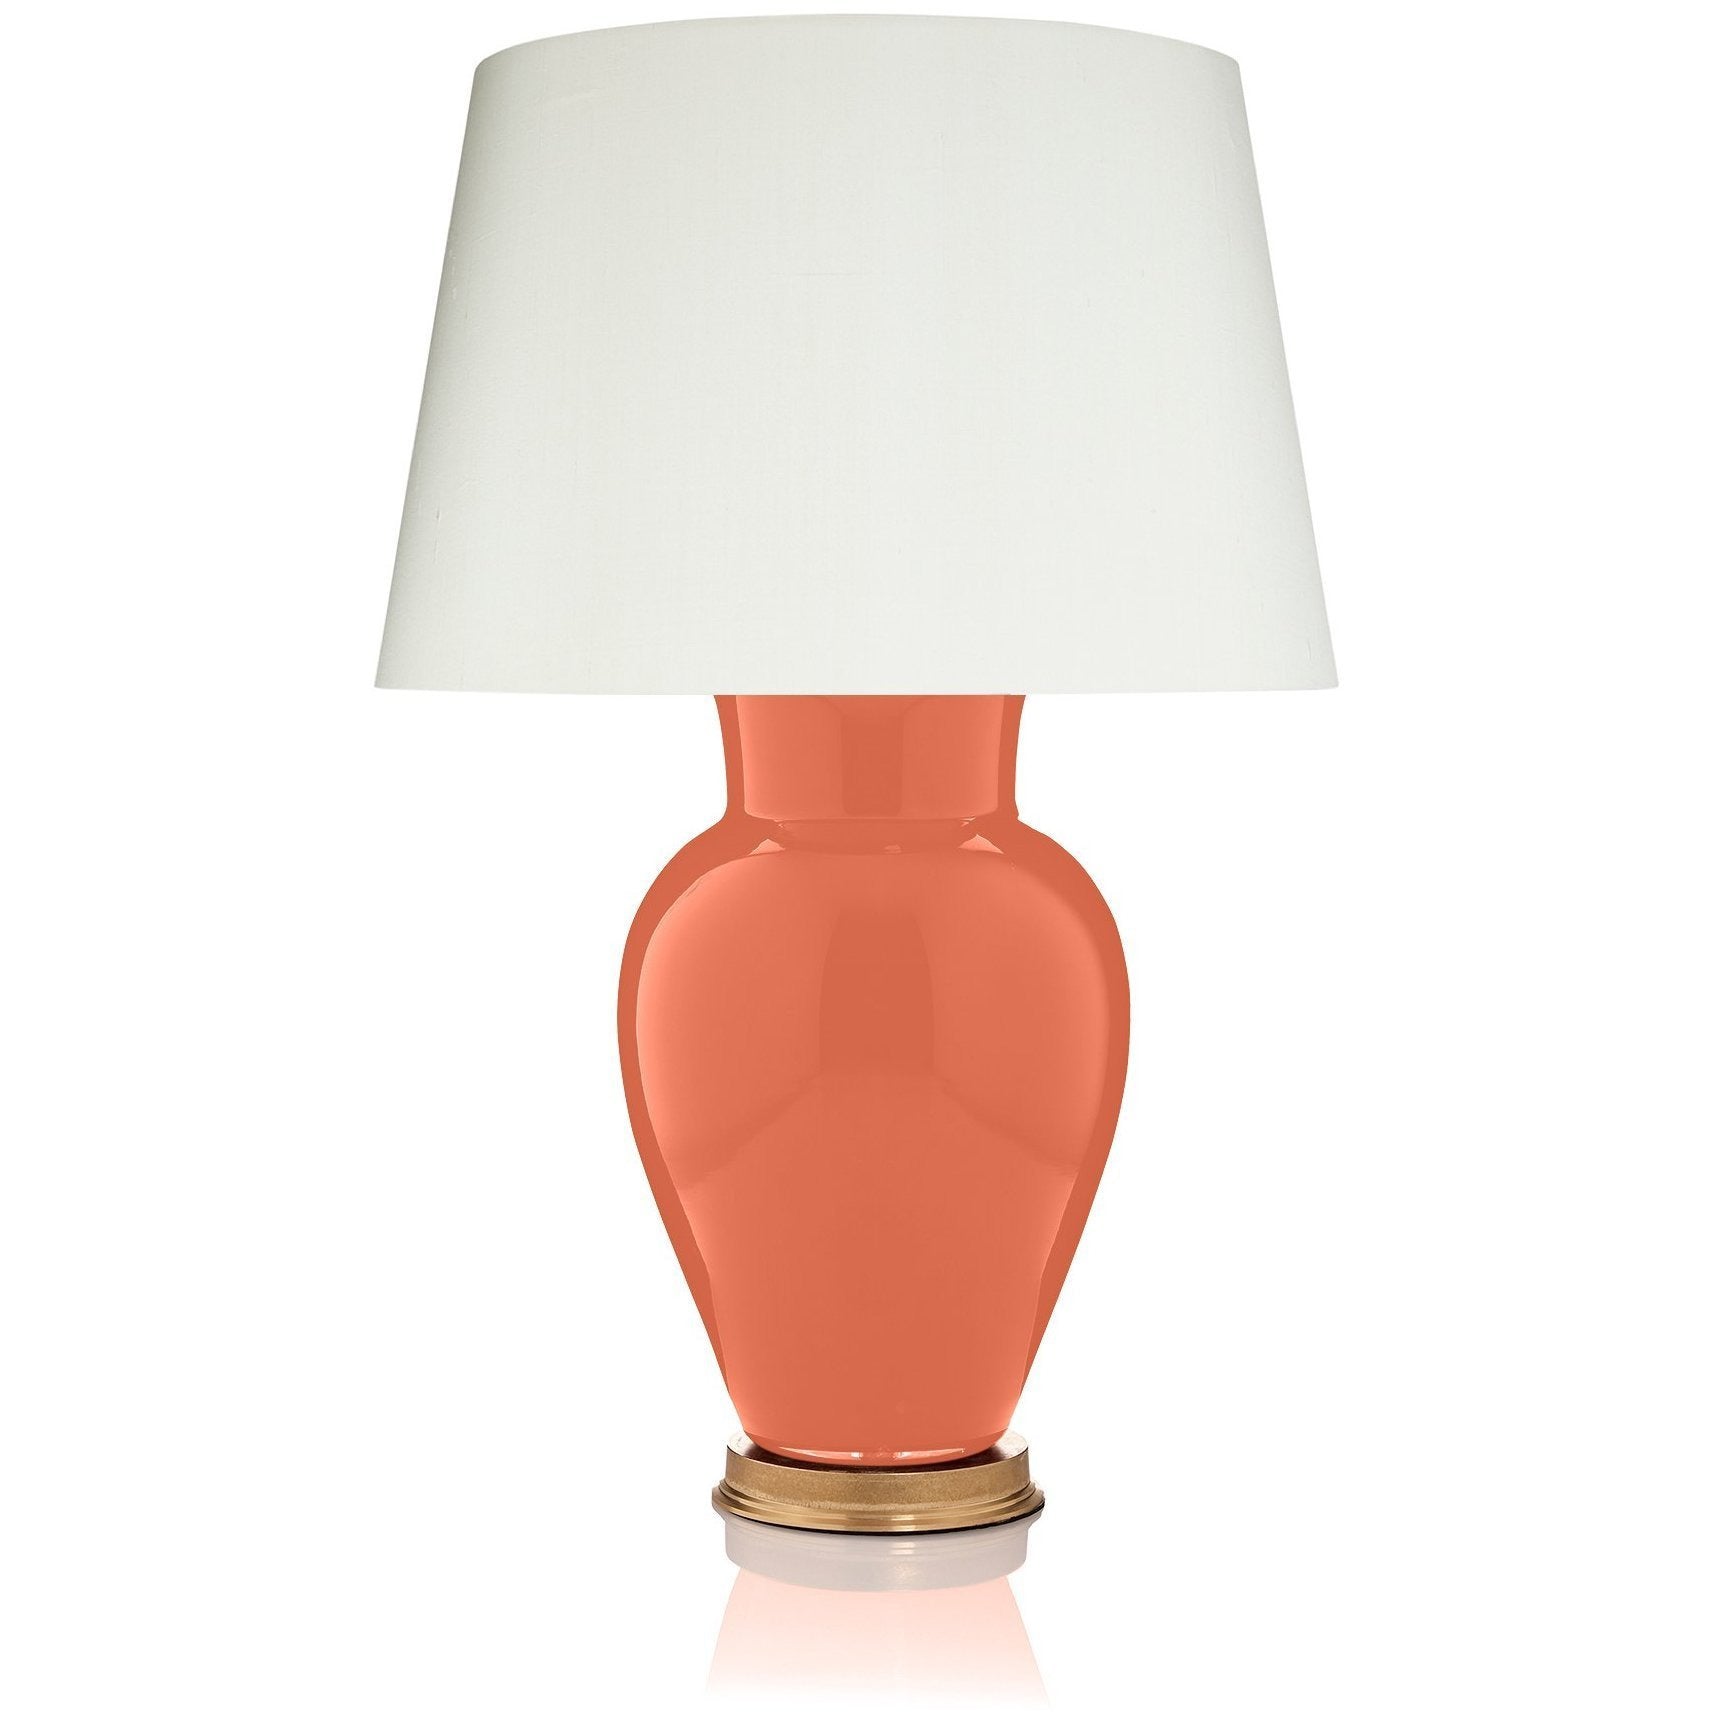 CORAL LAMP BASE IN LARGE